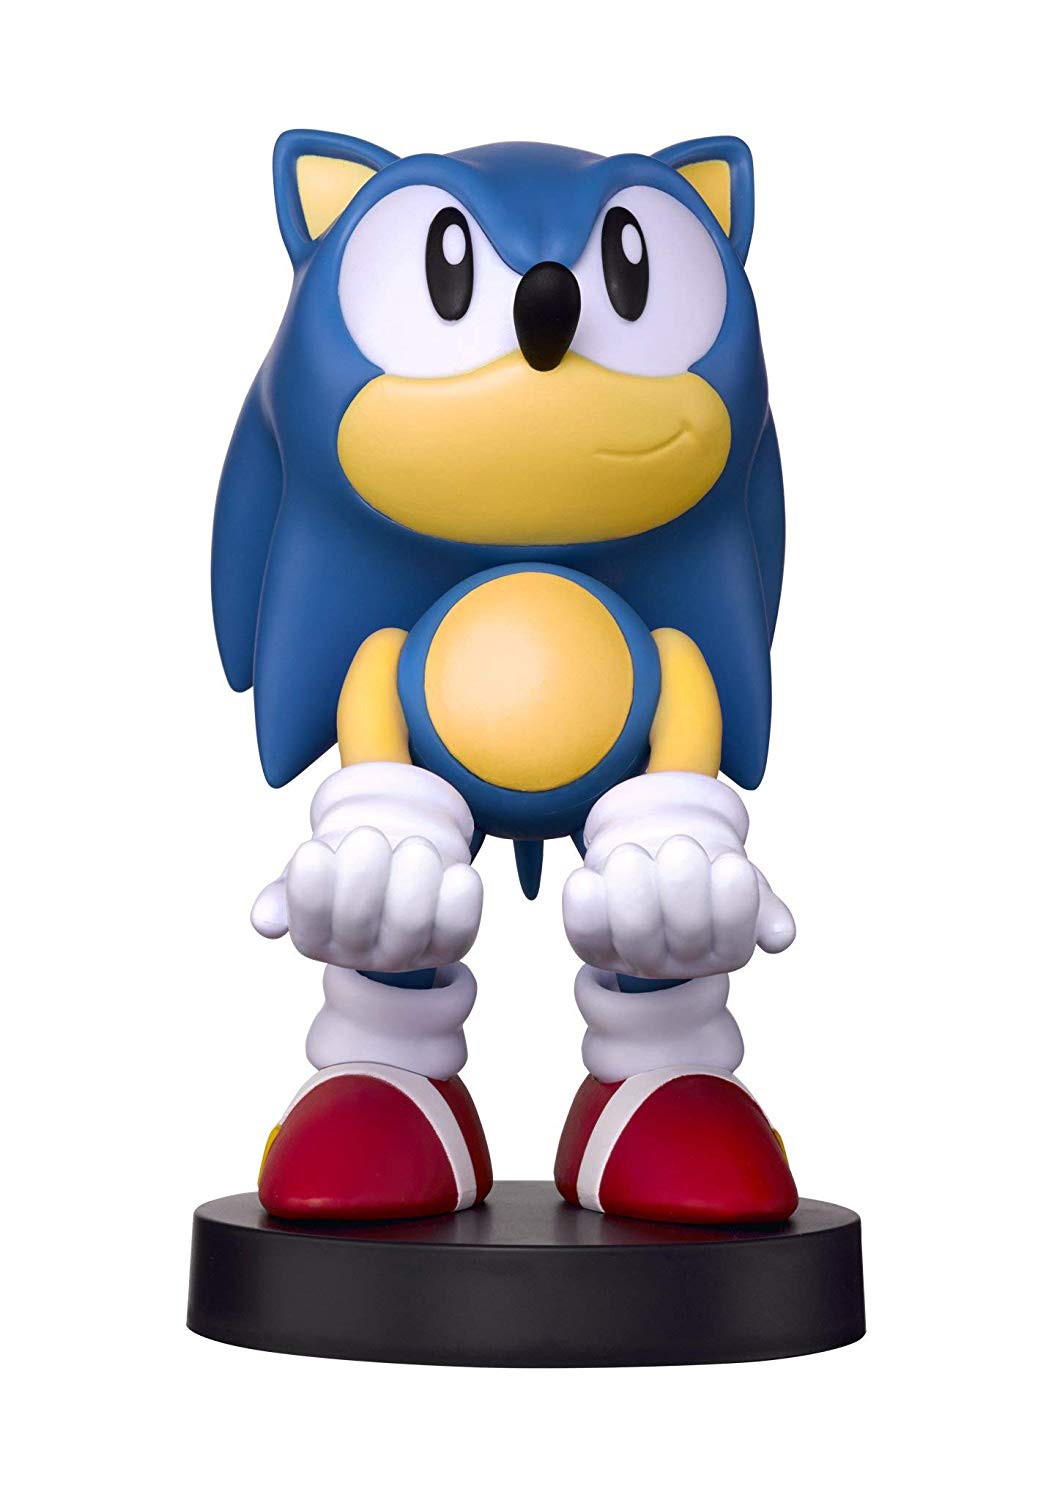 Sonic The Hedgehog Cable Guy stand